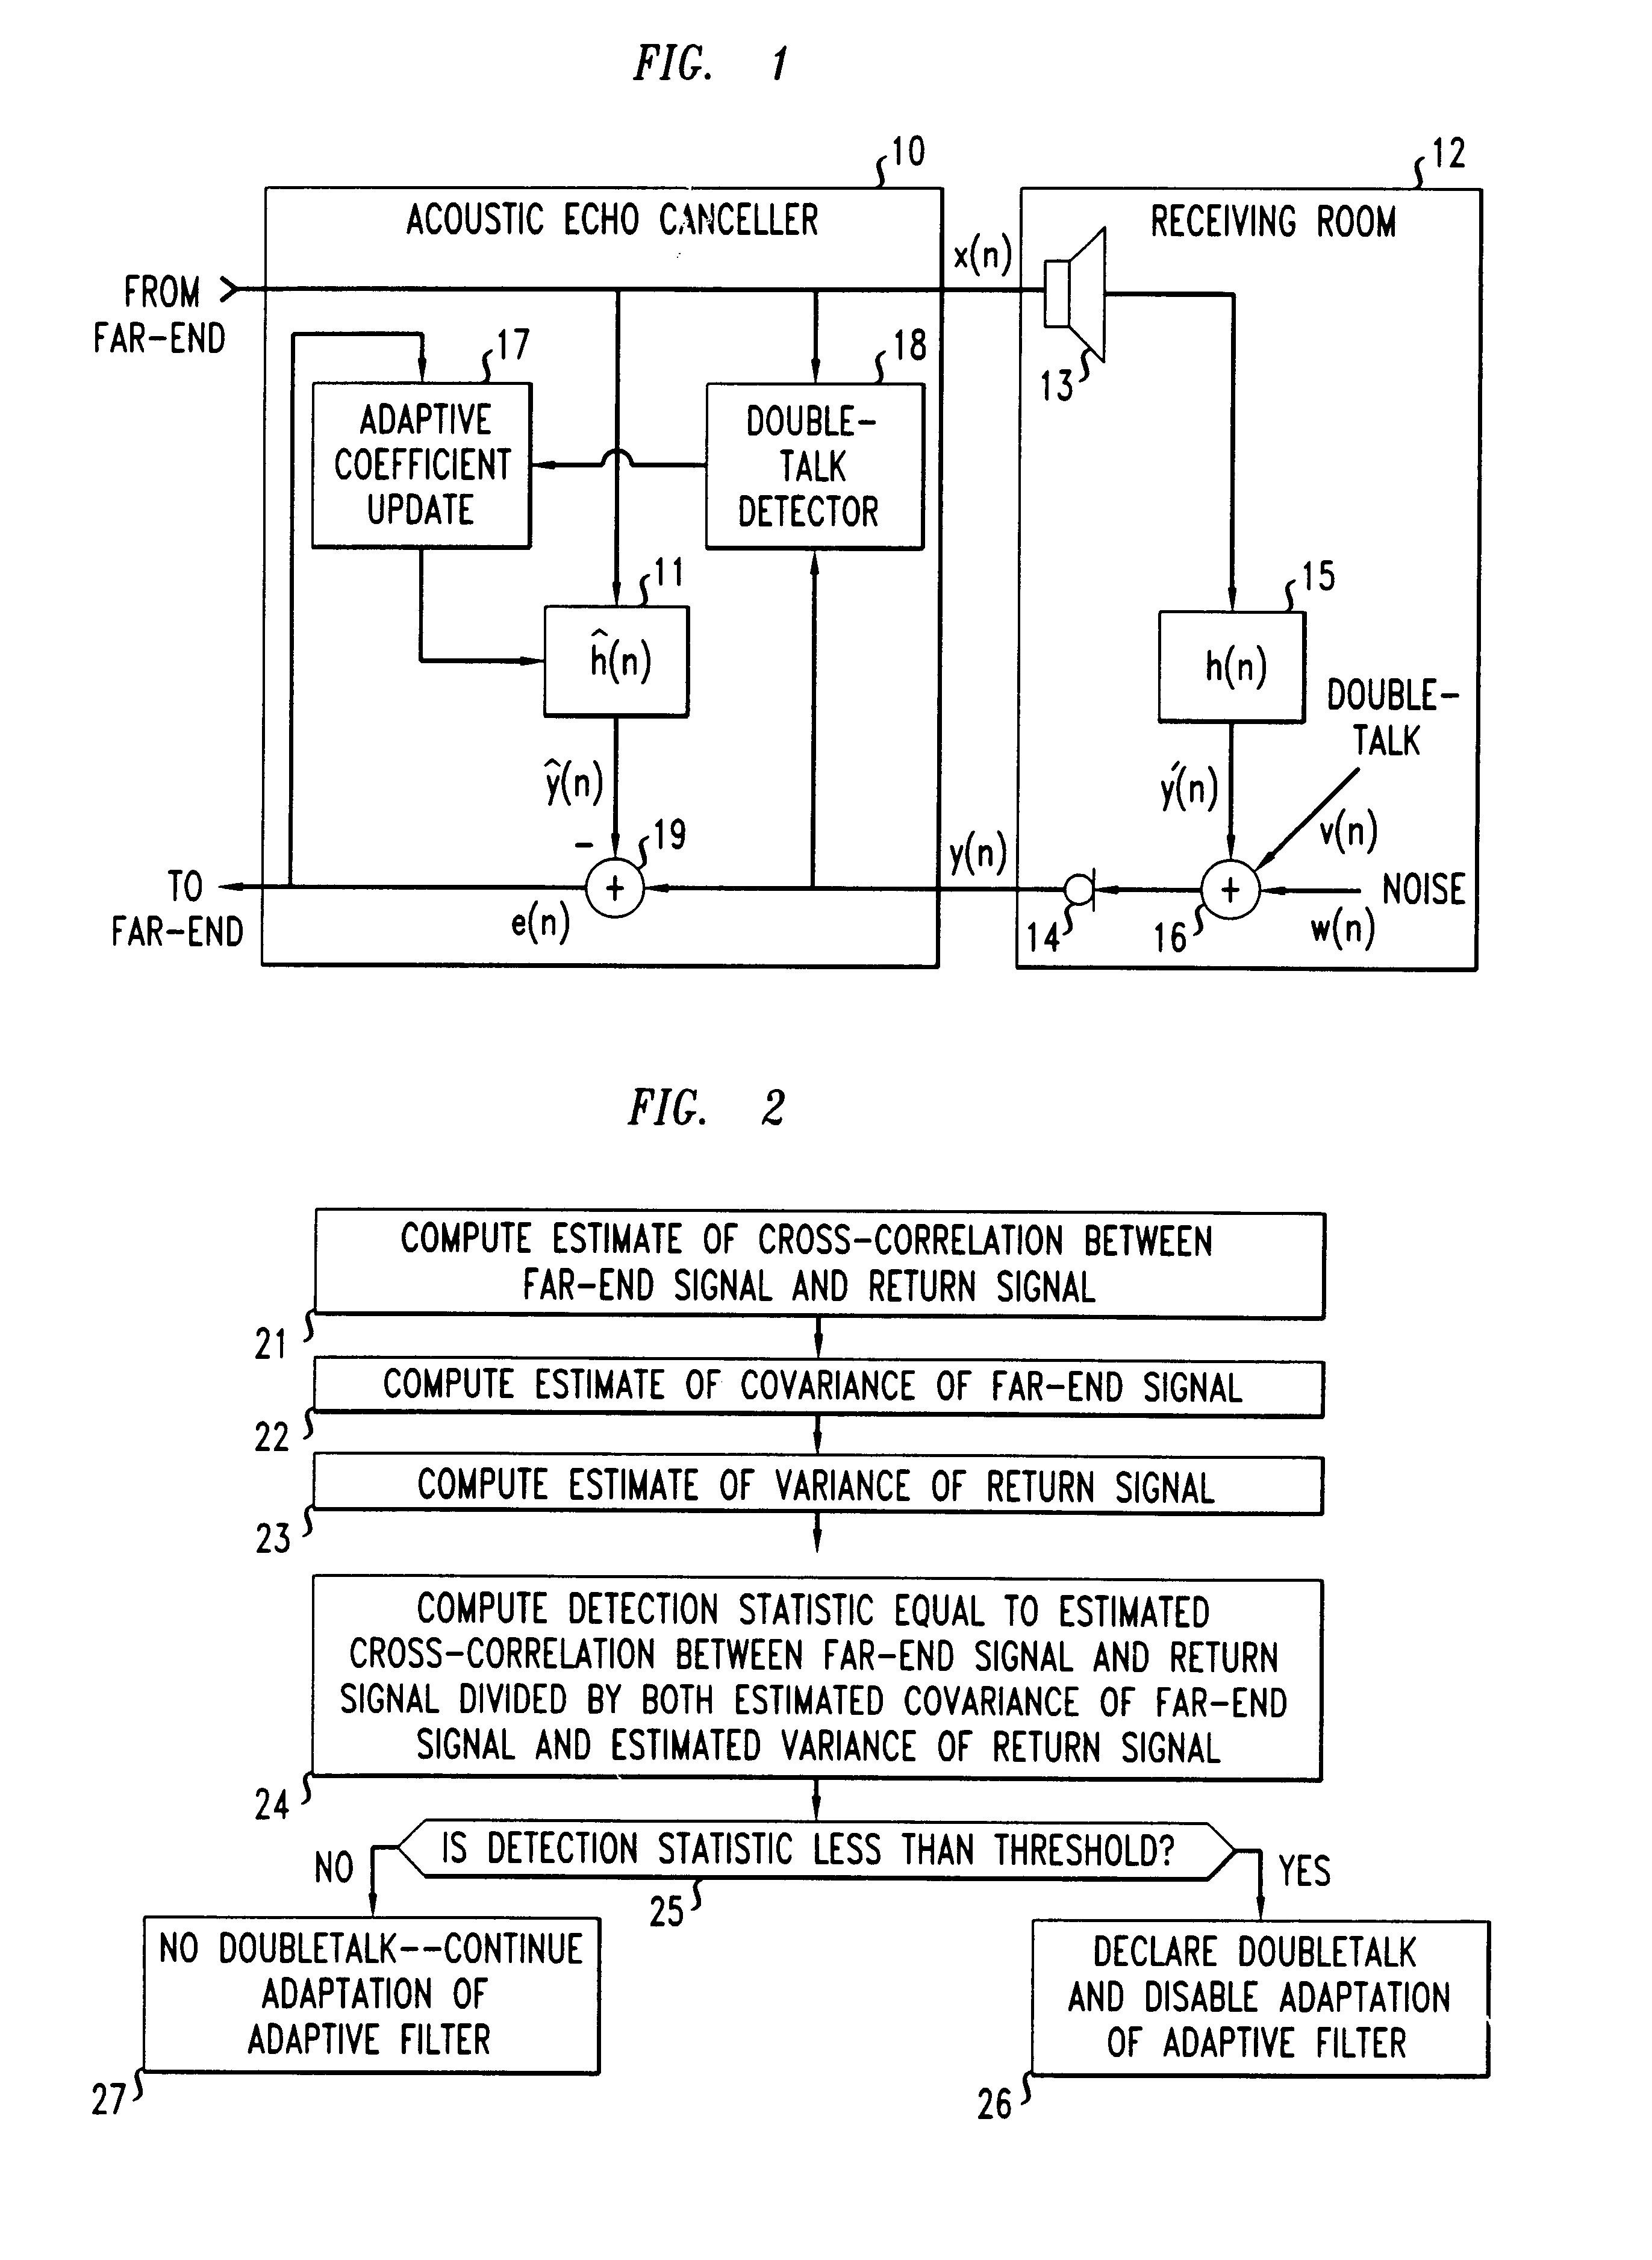 Method and apparatus for performing double-talk detection in acoustic echo cancellation